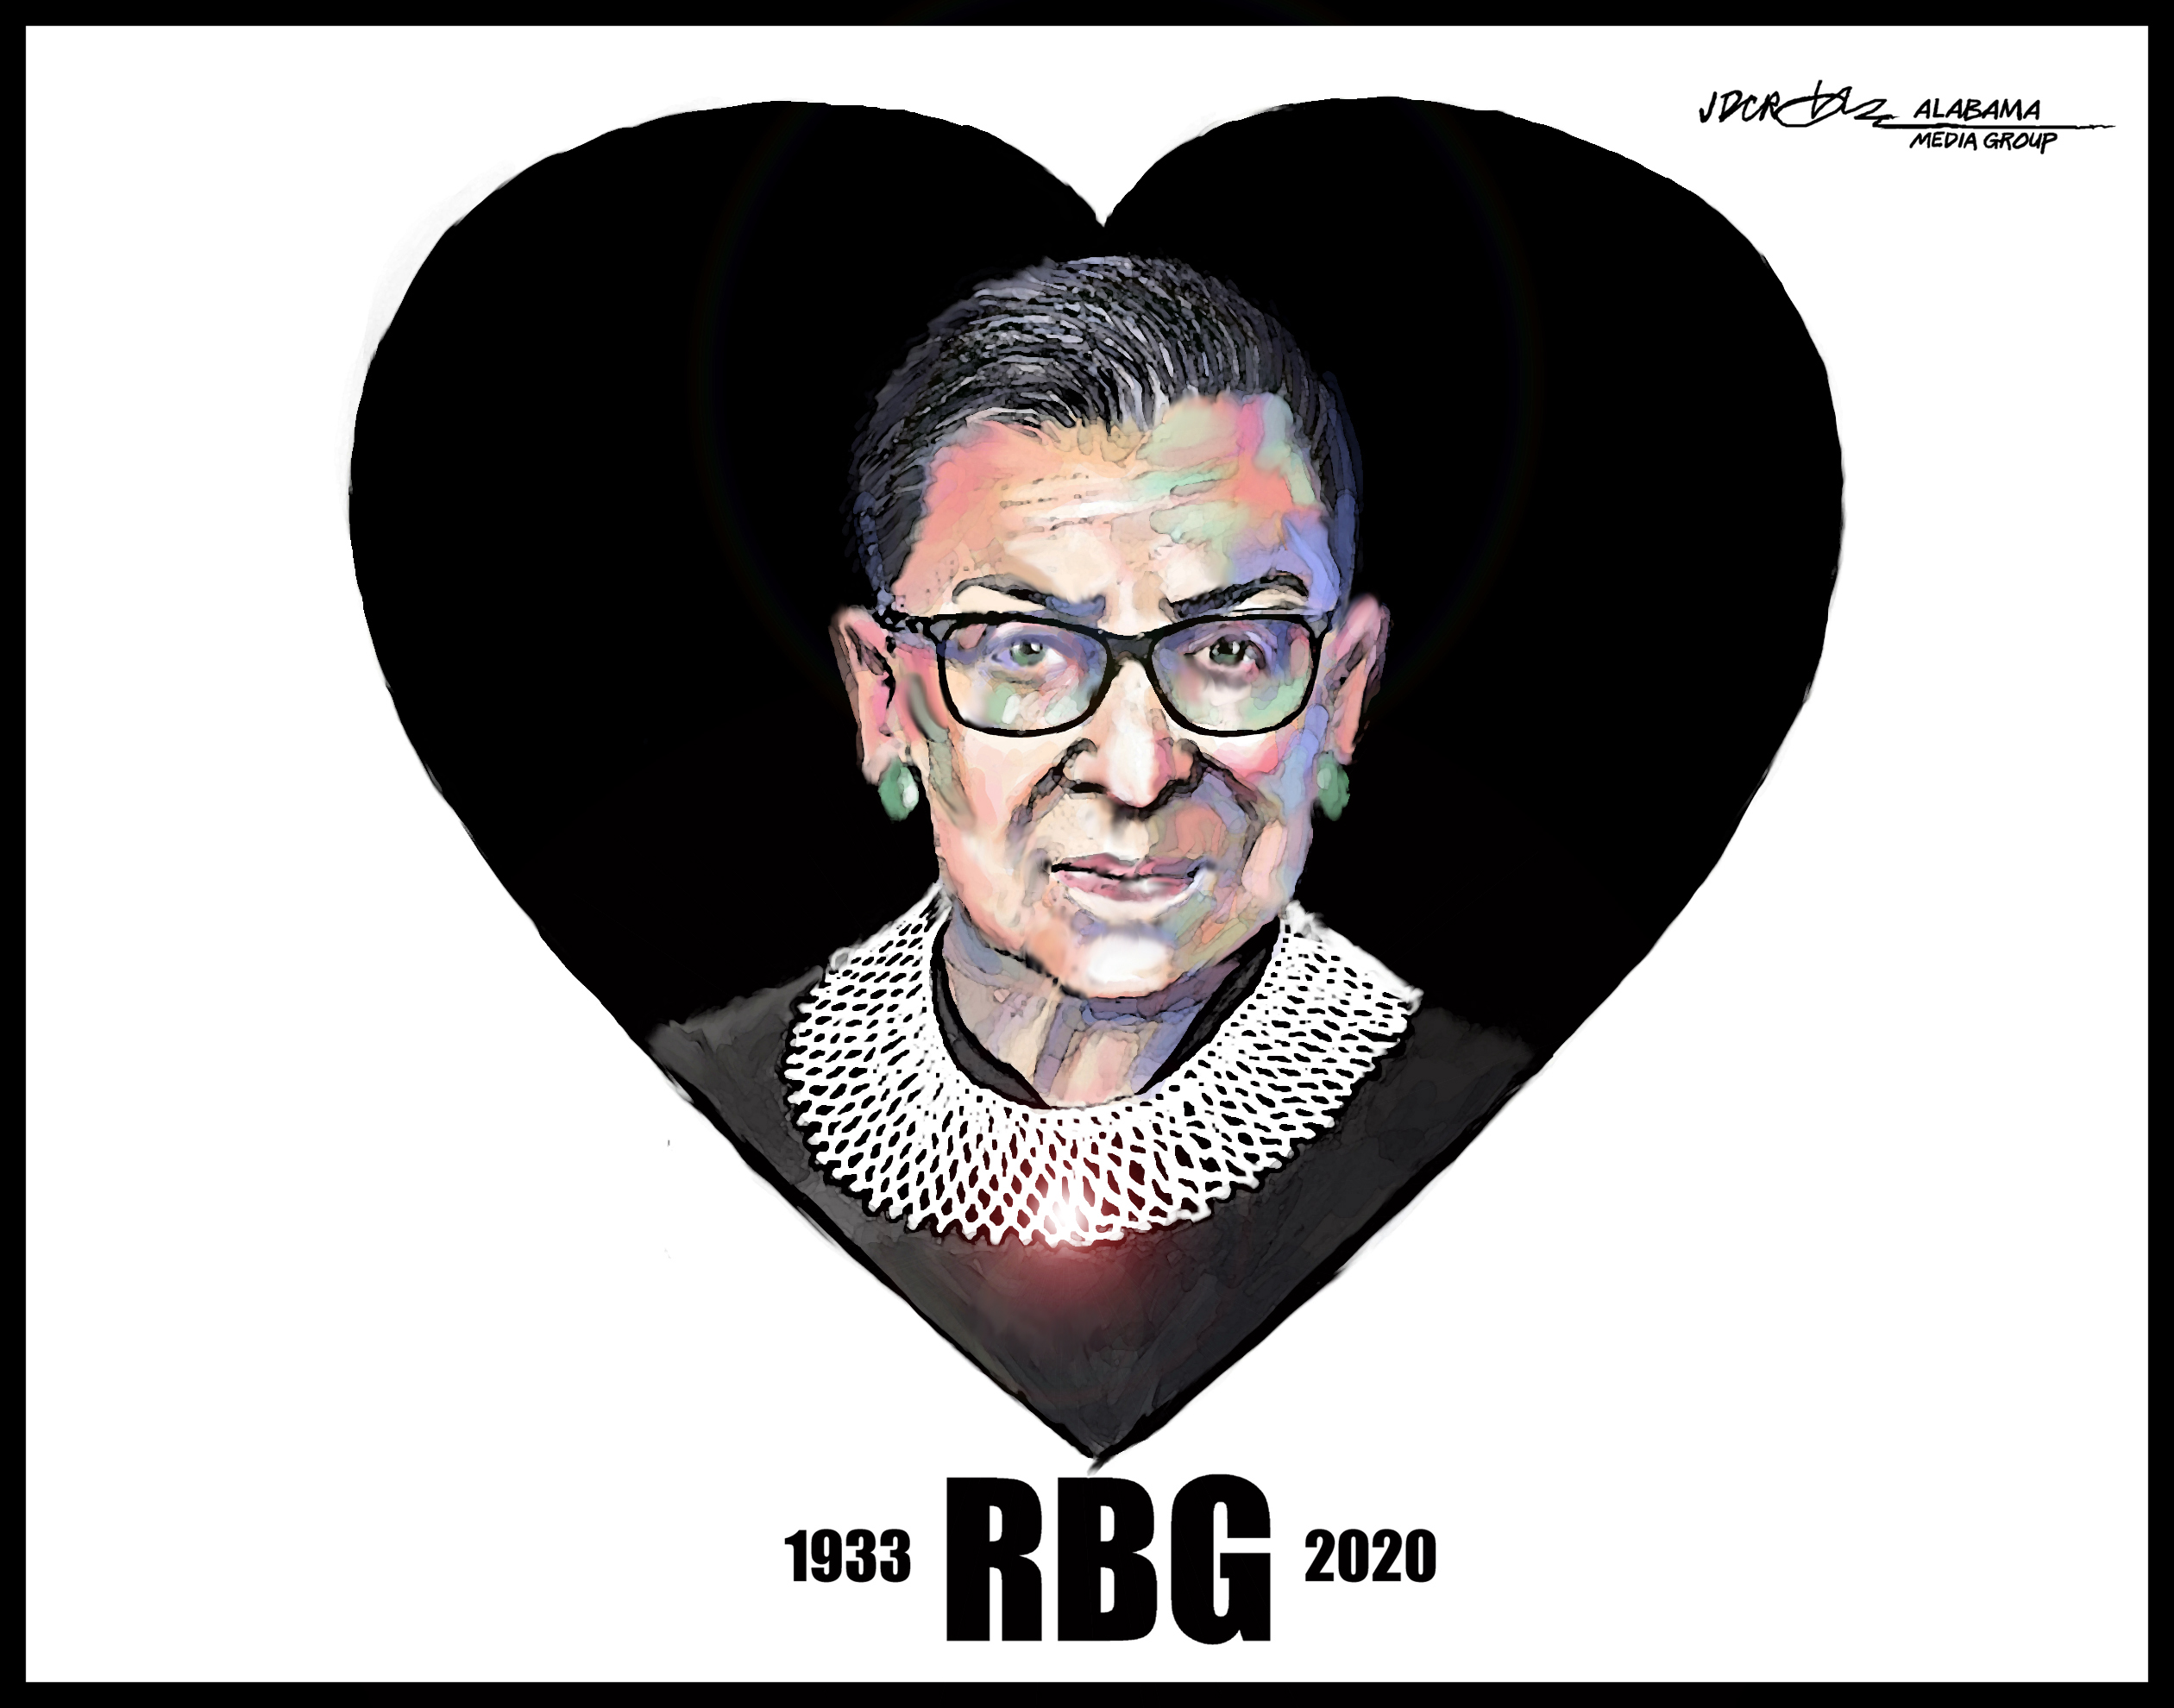 Ruth Bader Ginsburg: Tribute to the 'Notorious RBG' - al.com